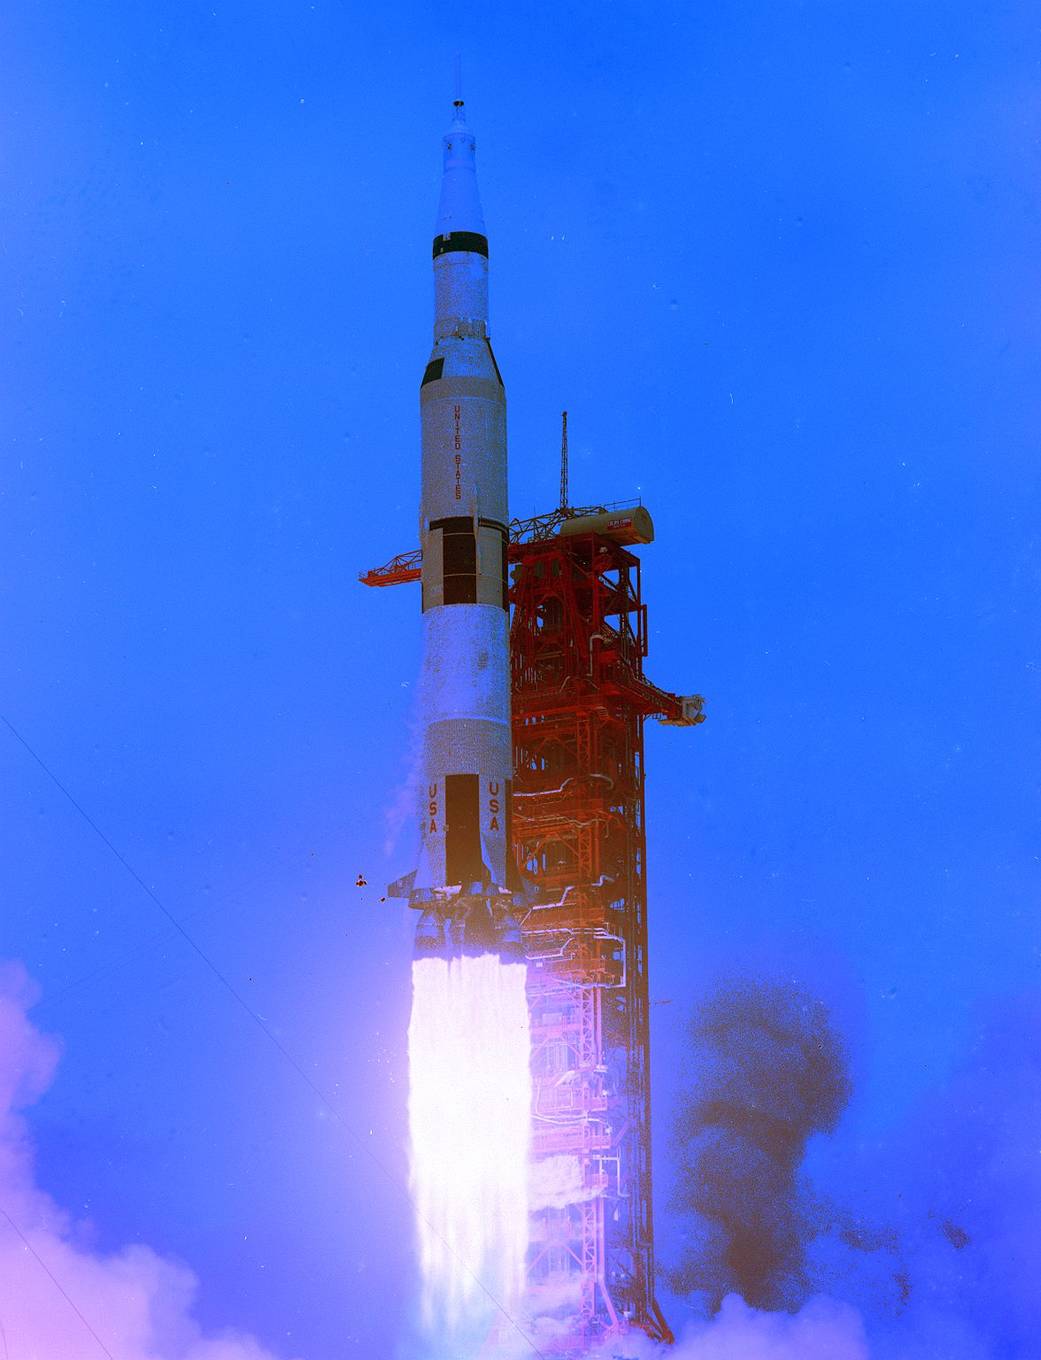 Apollo 10 launch. The Saturn V lifts from the launch pad in a blaze of fire.